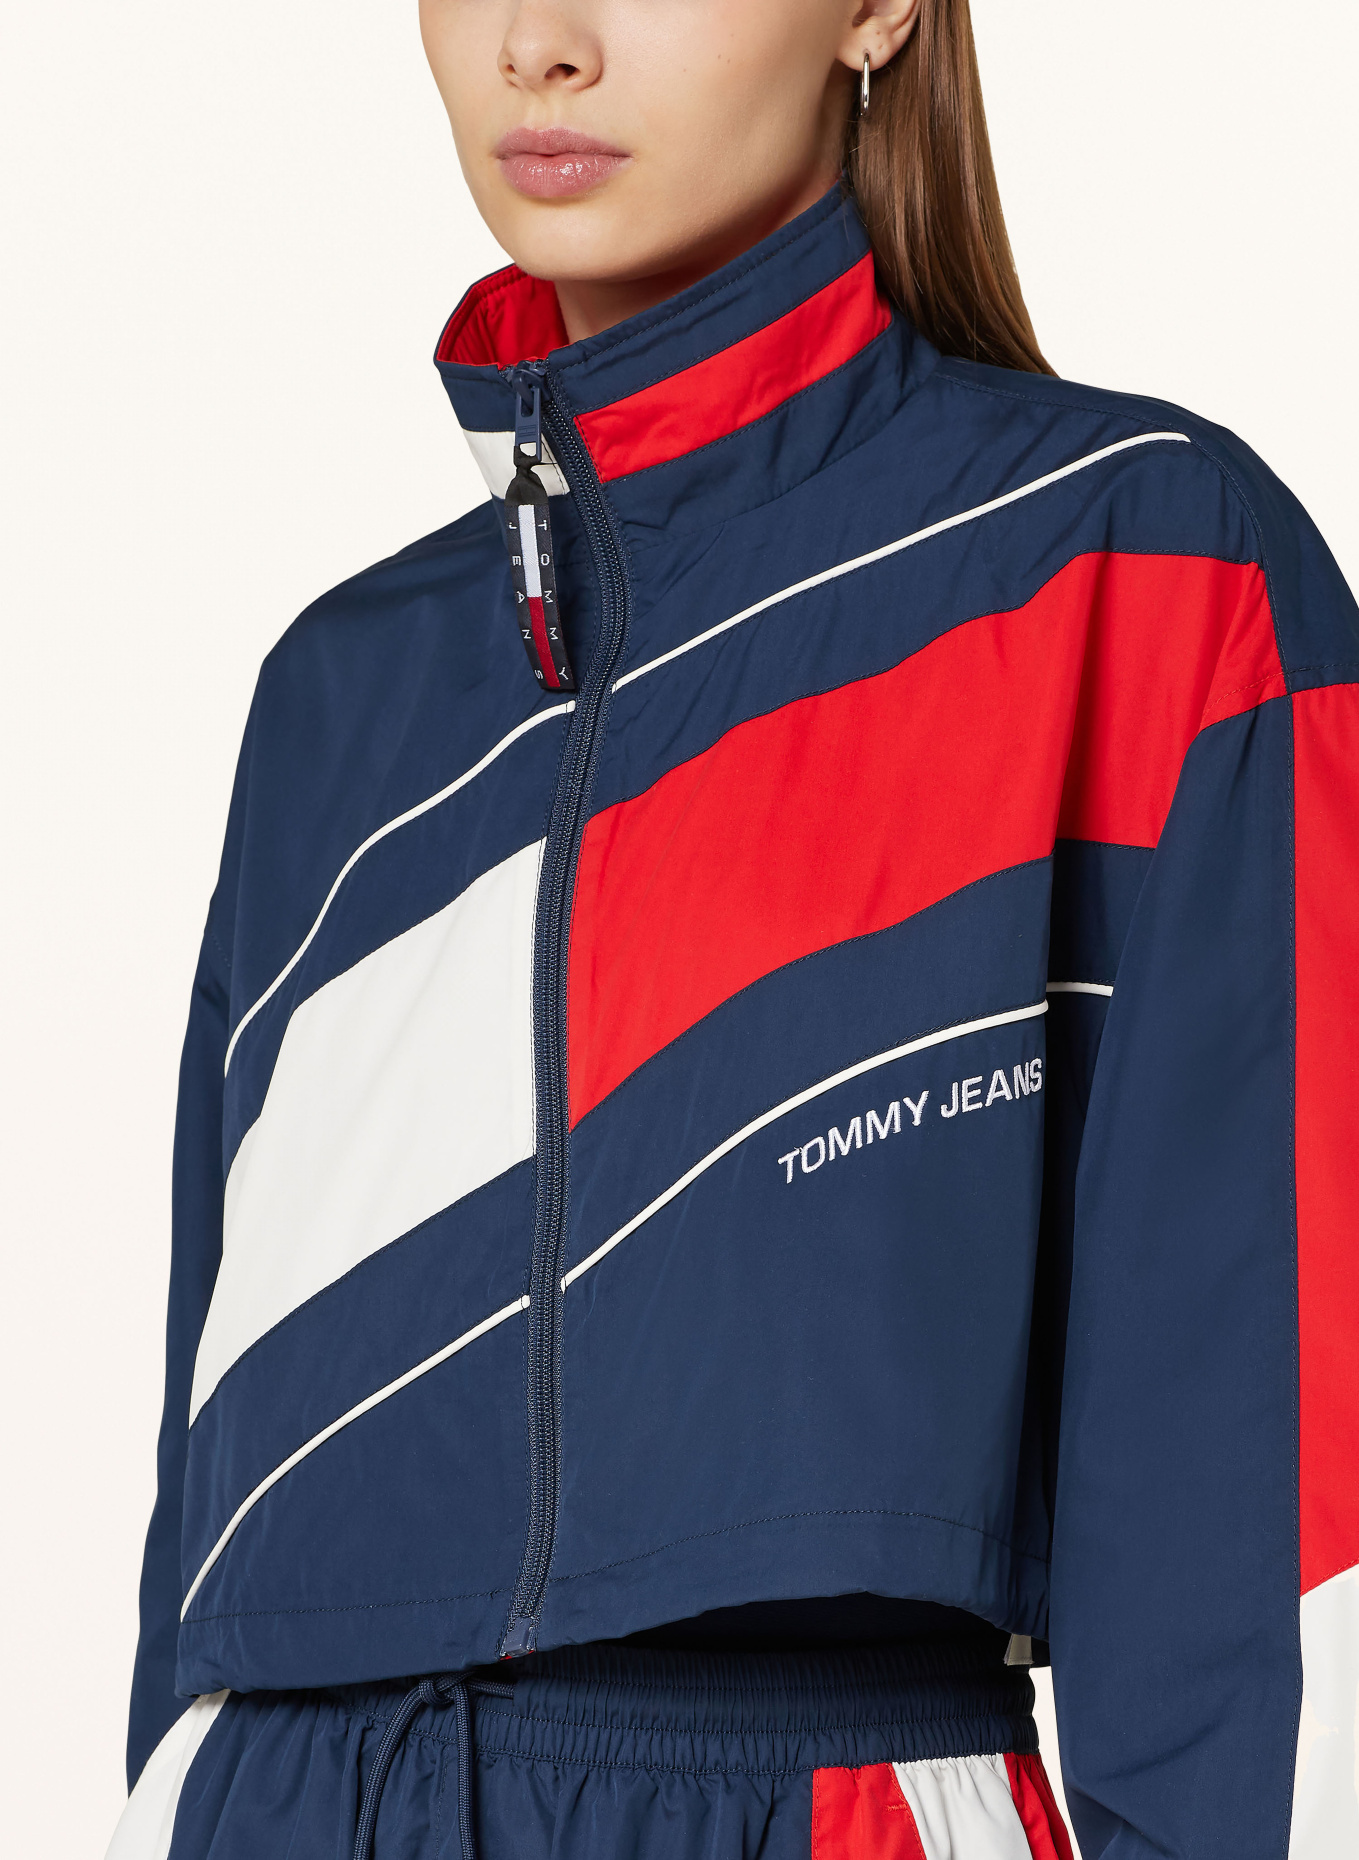 TOMMY JEANS Training jacket, Color: DARK BLUE/ RED/ WHITE (Image 4)